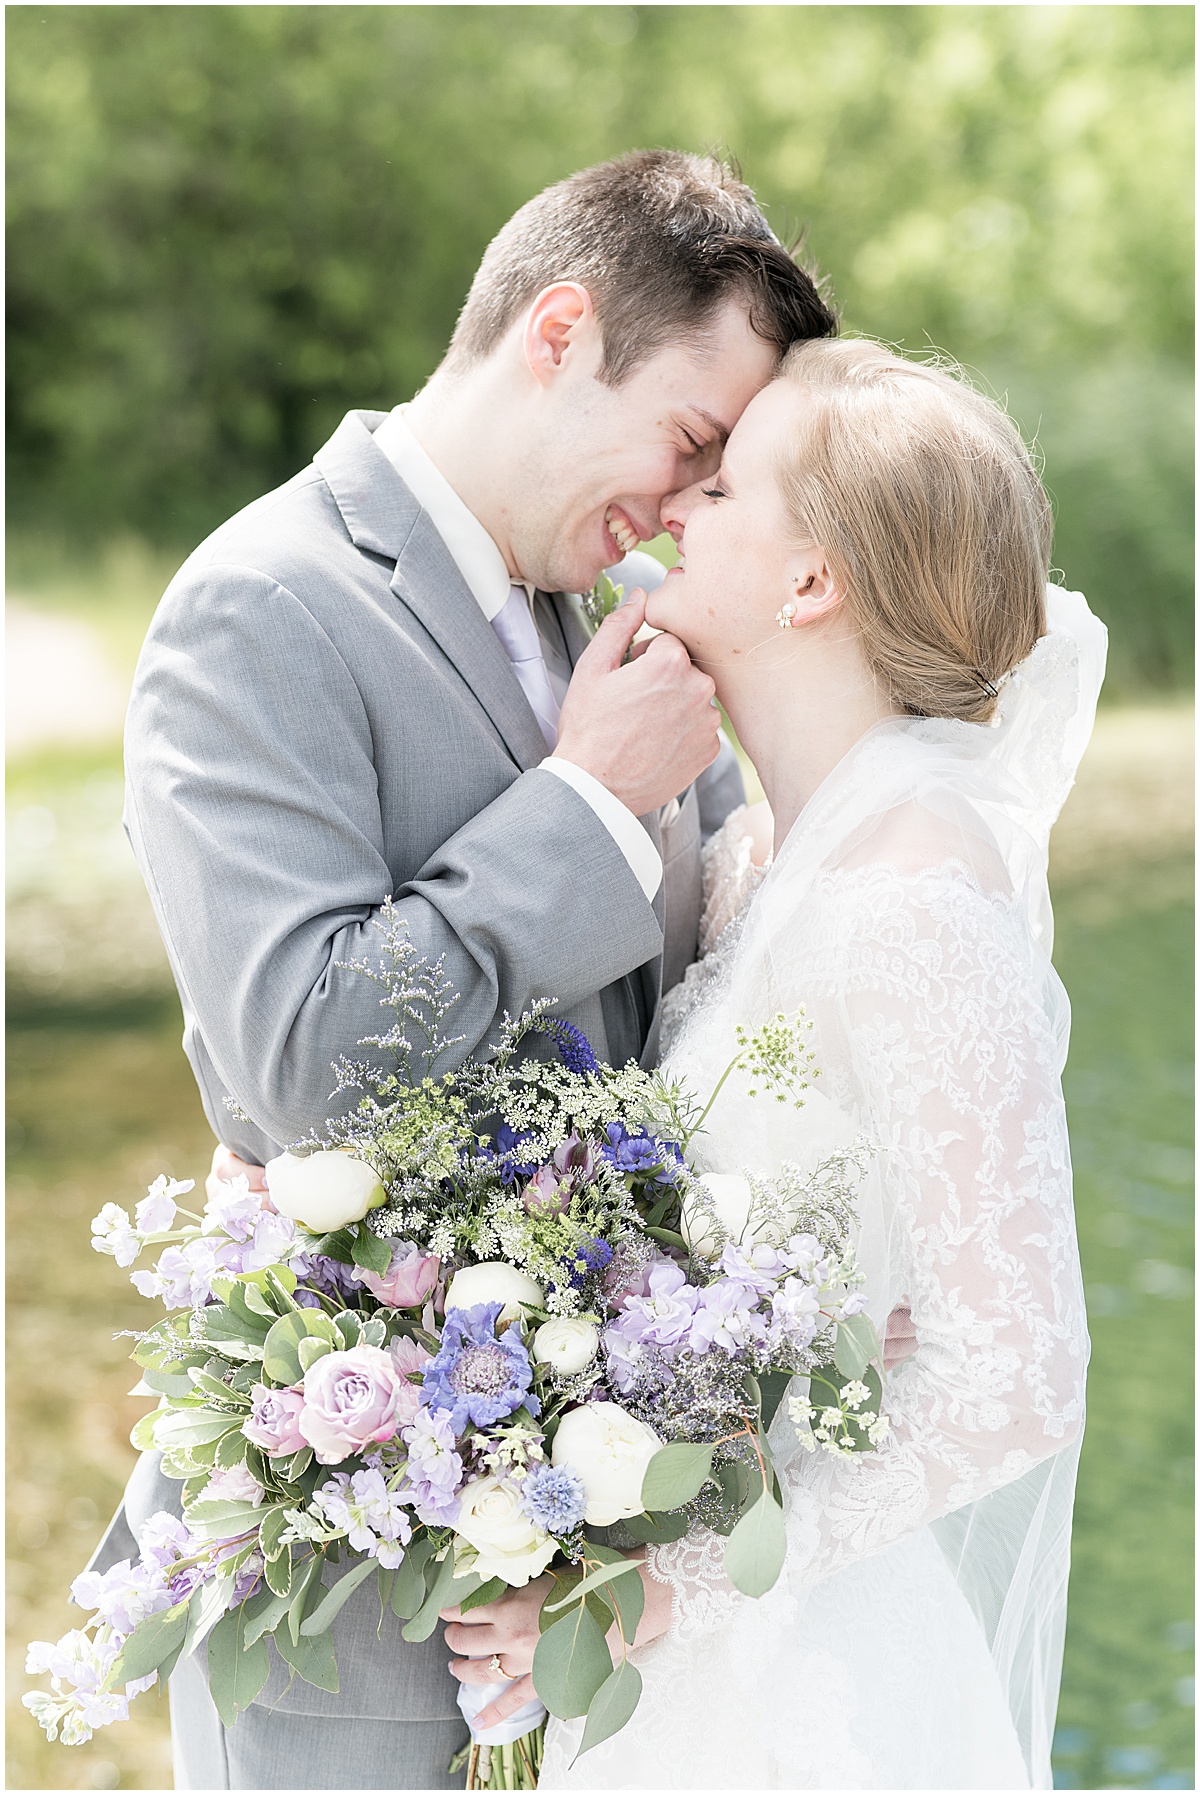 Bride and groom portrait at Traders Point Creamery wedding in Zionsville, Indiana